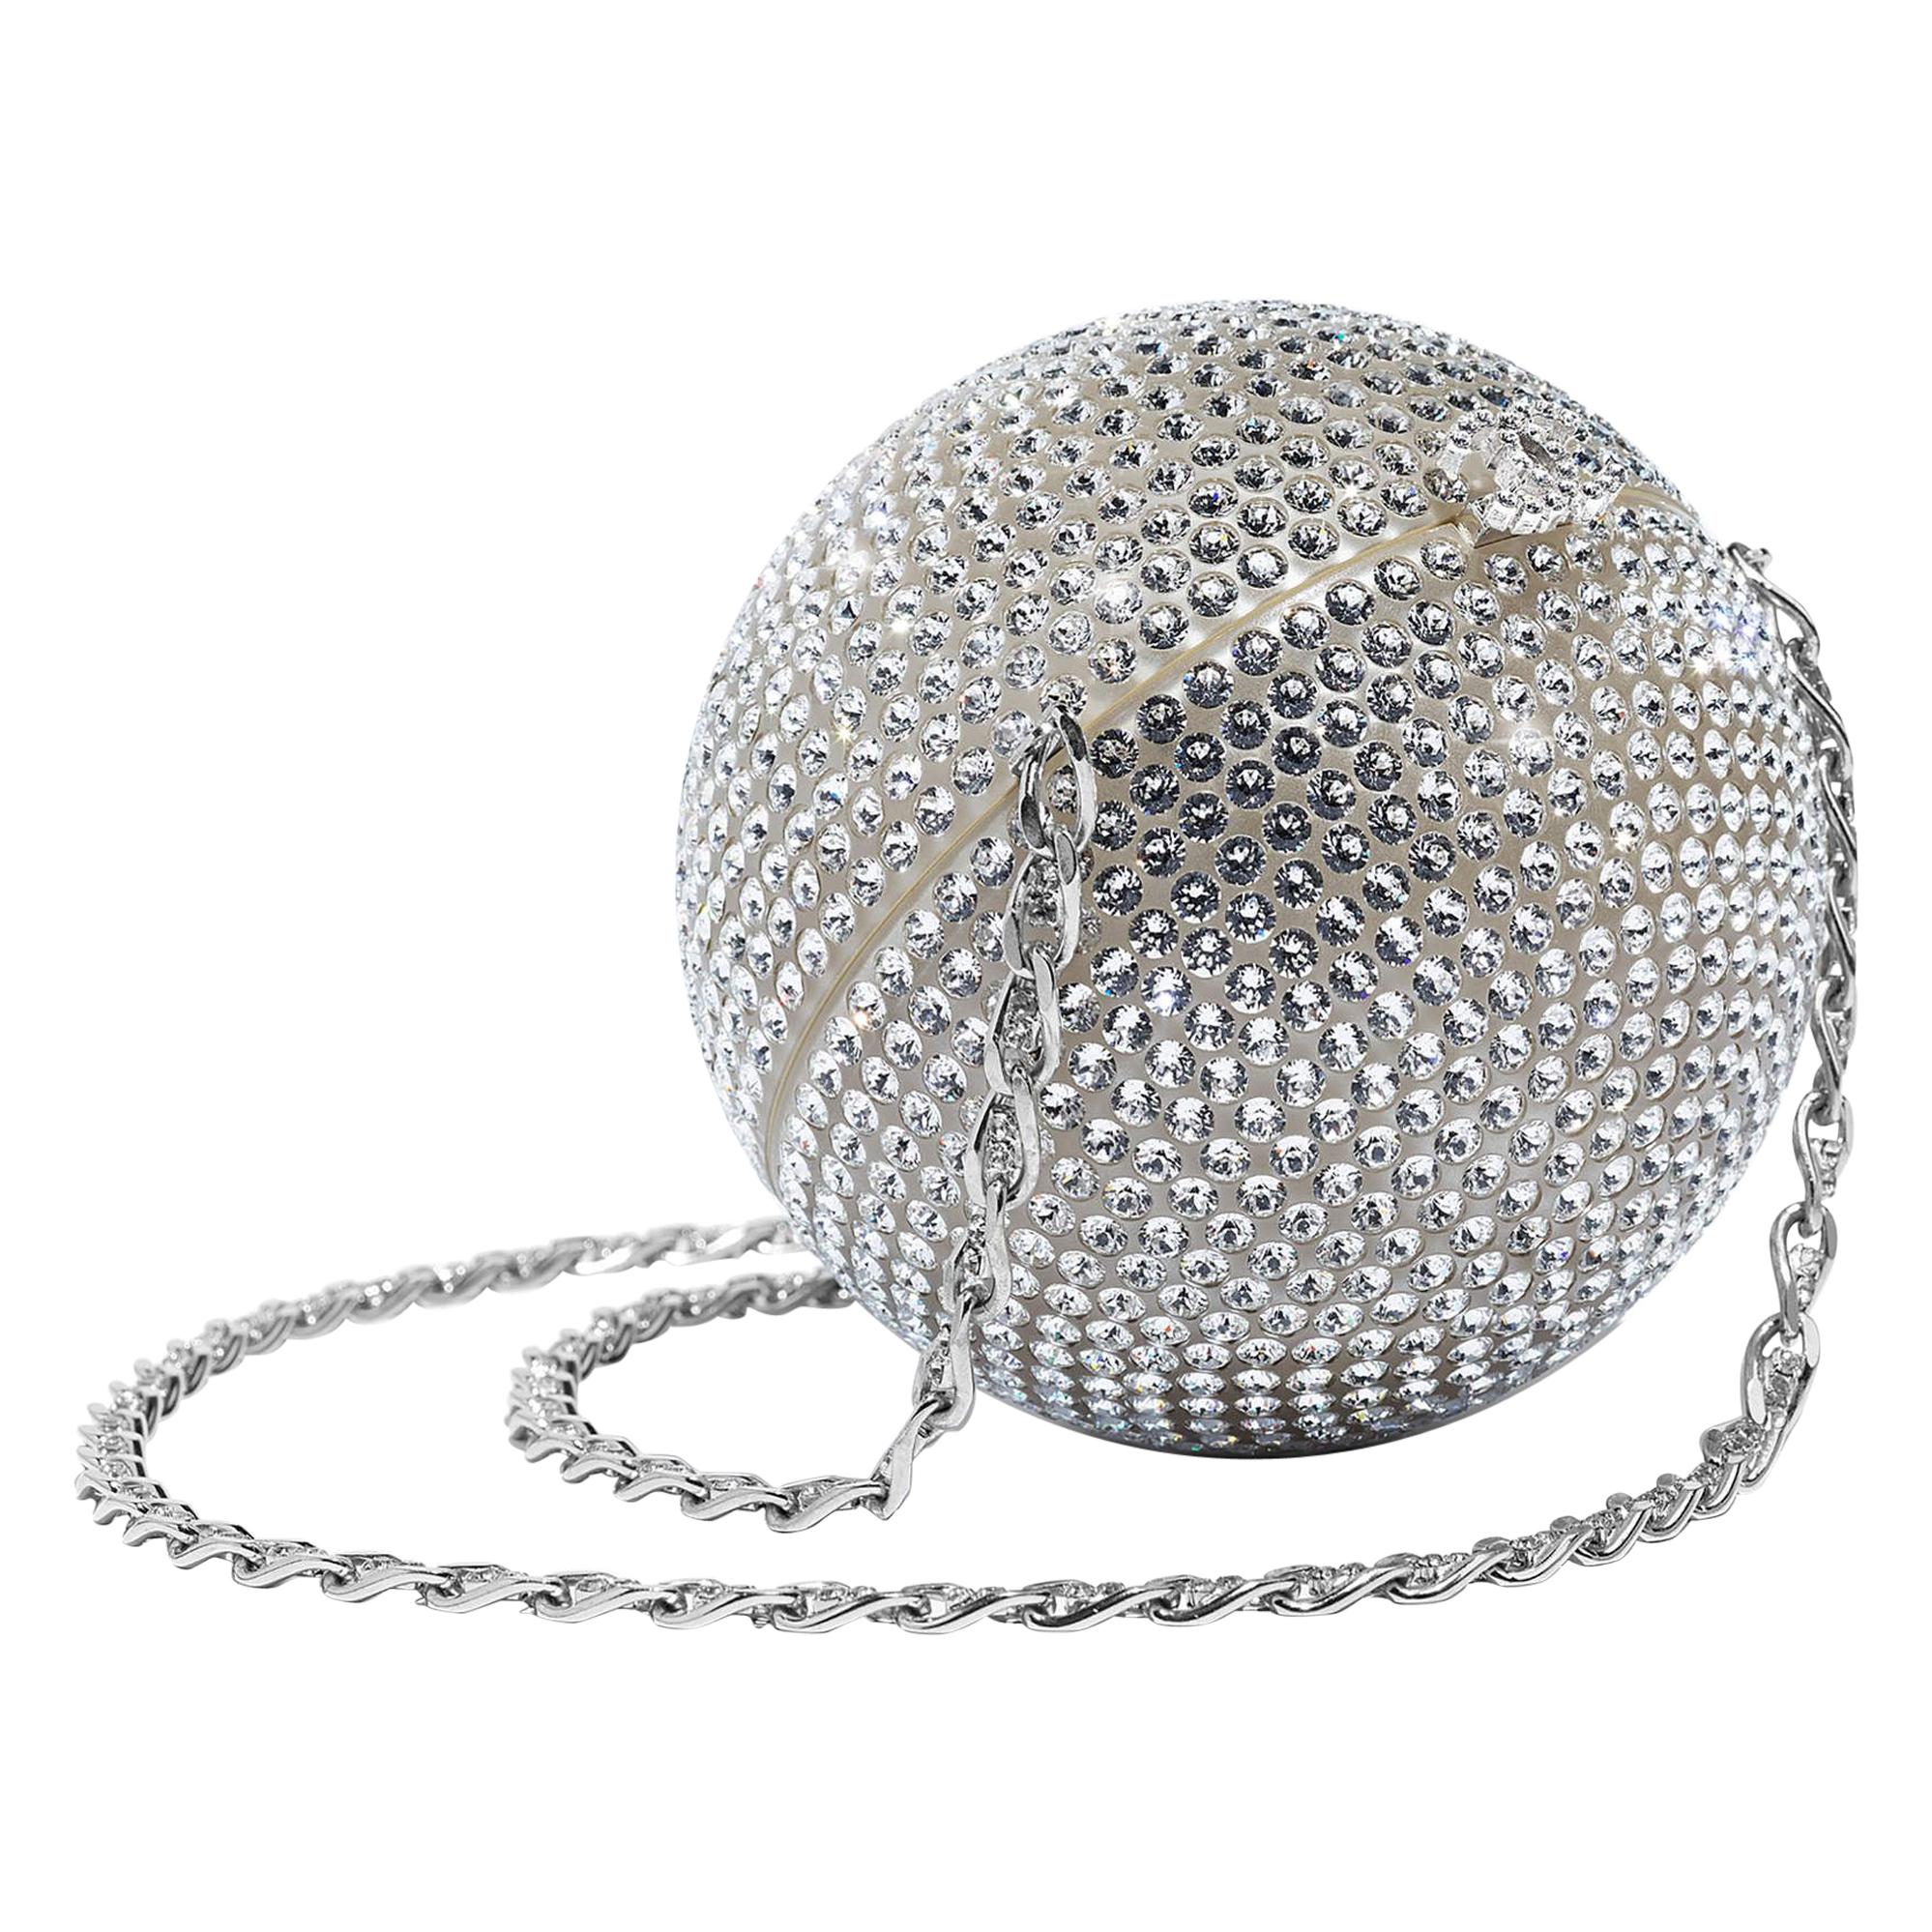 Chanel Runway Off White Round Evening Clutch Crystal Ball Shoulder Flap Bag